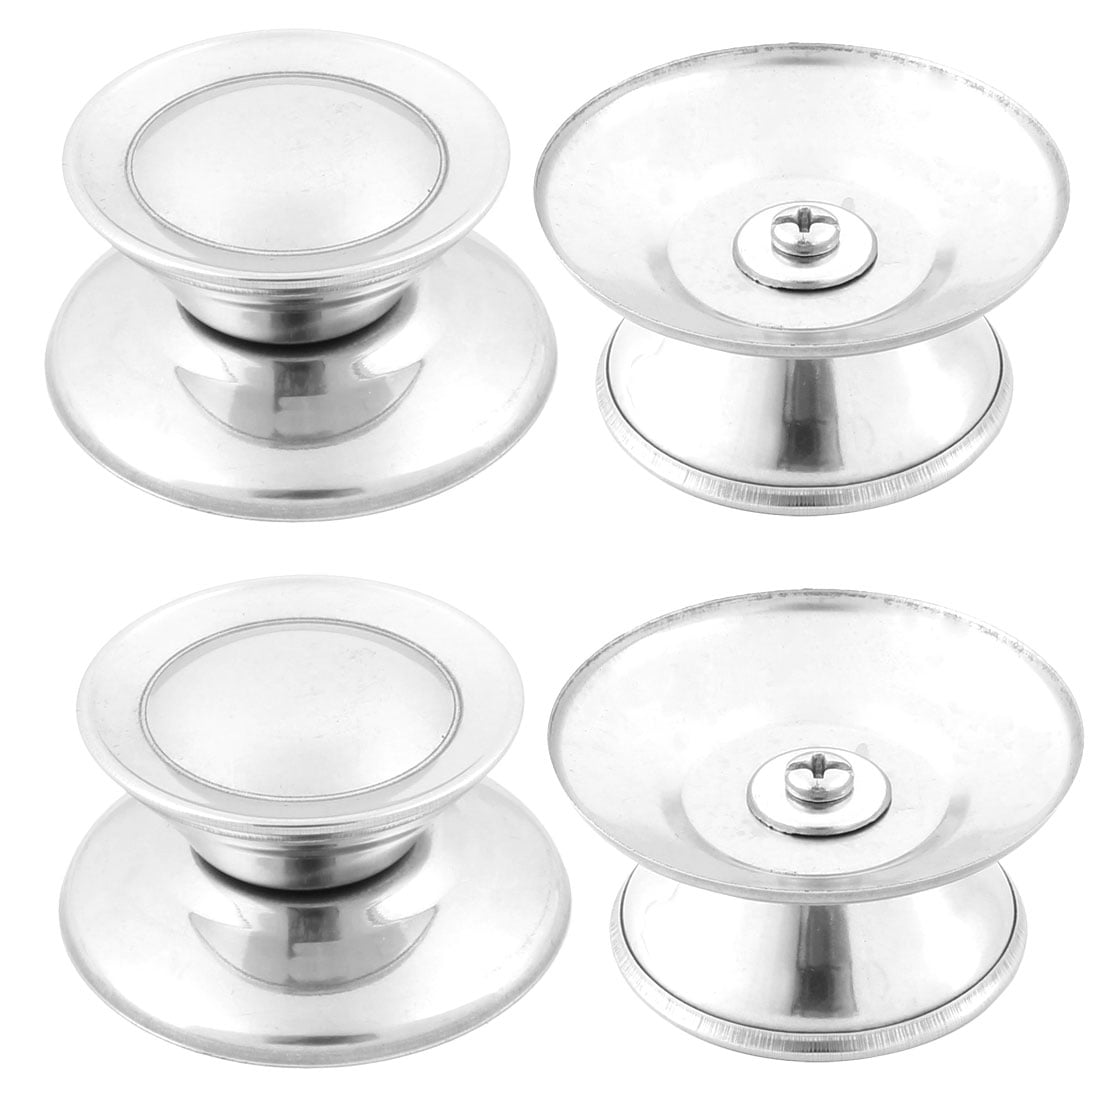 sourcingmap® Stainless Steel Home Kitchen Insulated Cooker Pot Lid Cover Cap Knob Handle 4pcs